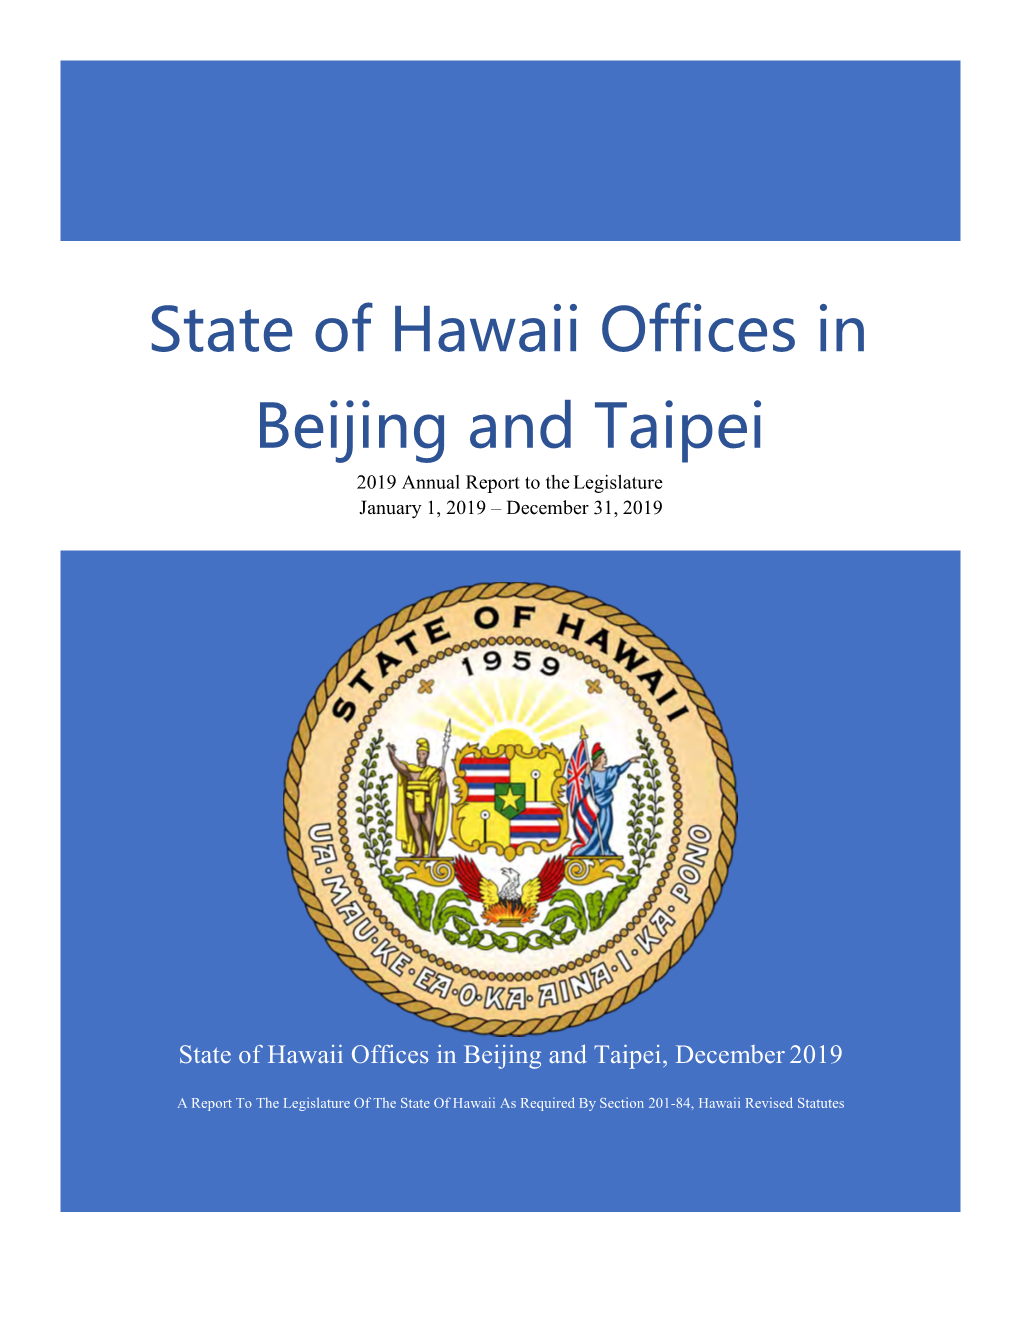 State of Hawaii Offices in Beijing and Taipei 2019 Annual Report to the Legislature January 1, 2019 – December 31, 2019